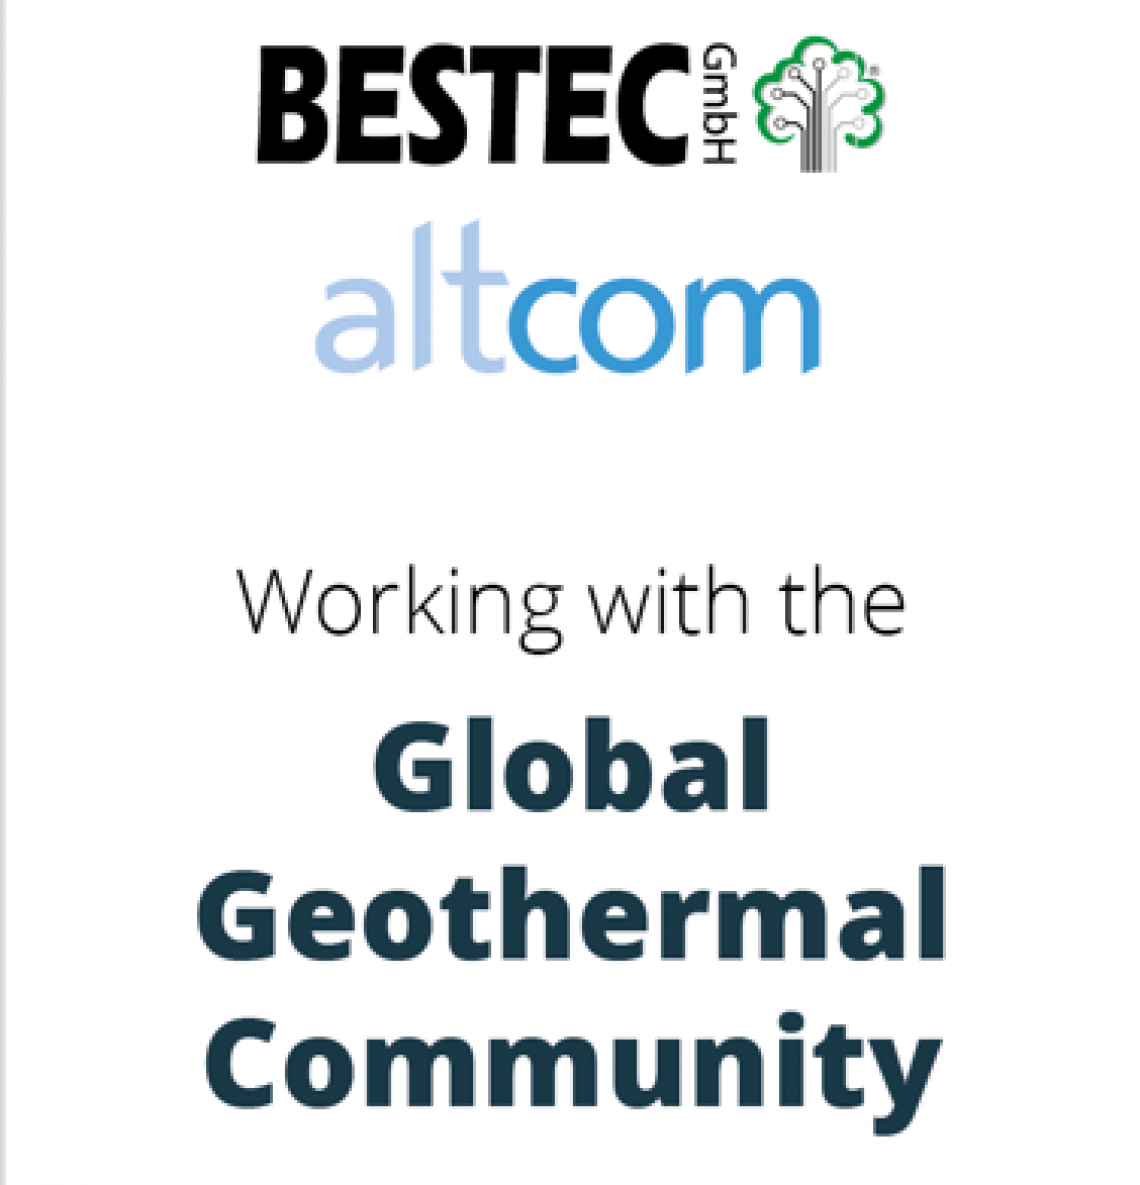 Working with the global geothermal community